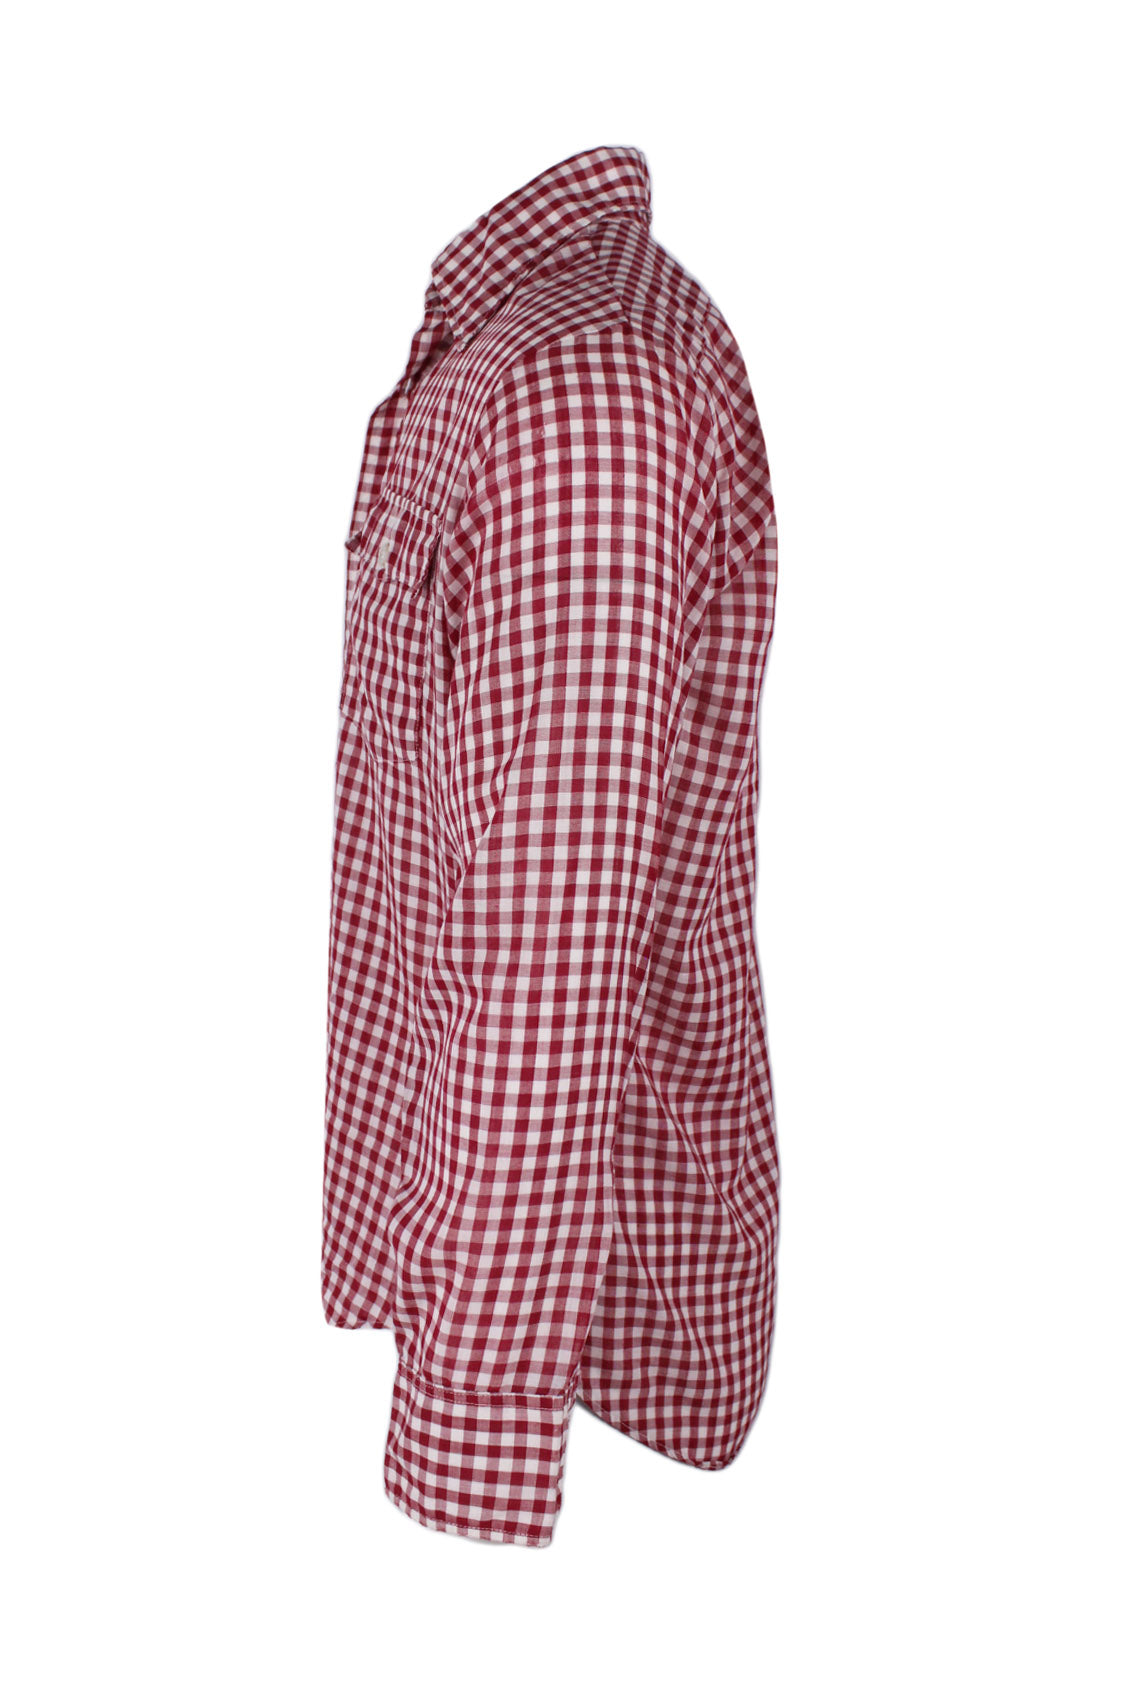 side angle vintage levi's brick red and white long sleeve gingham shirt on masculine mannequin torso.